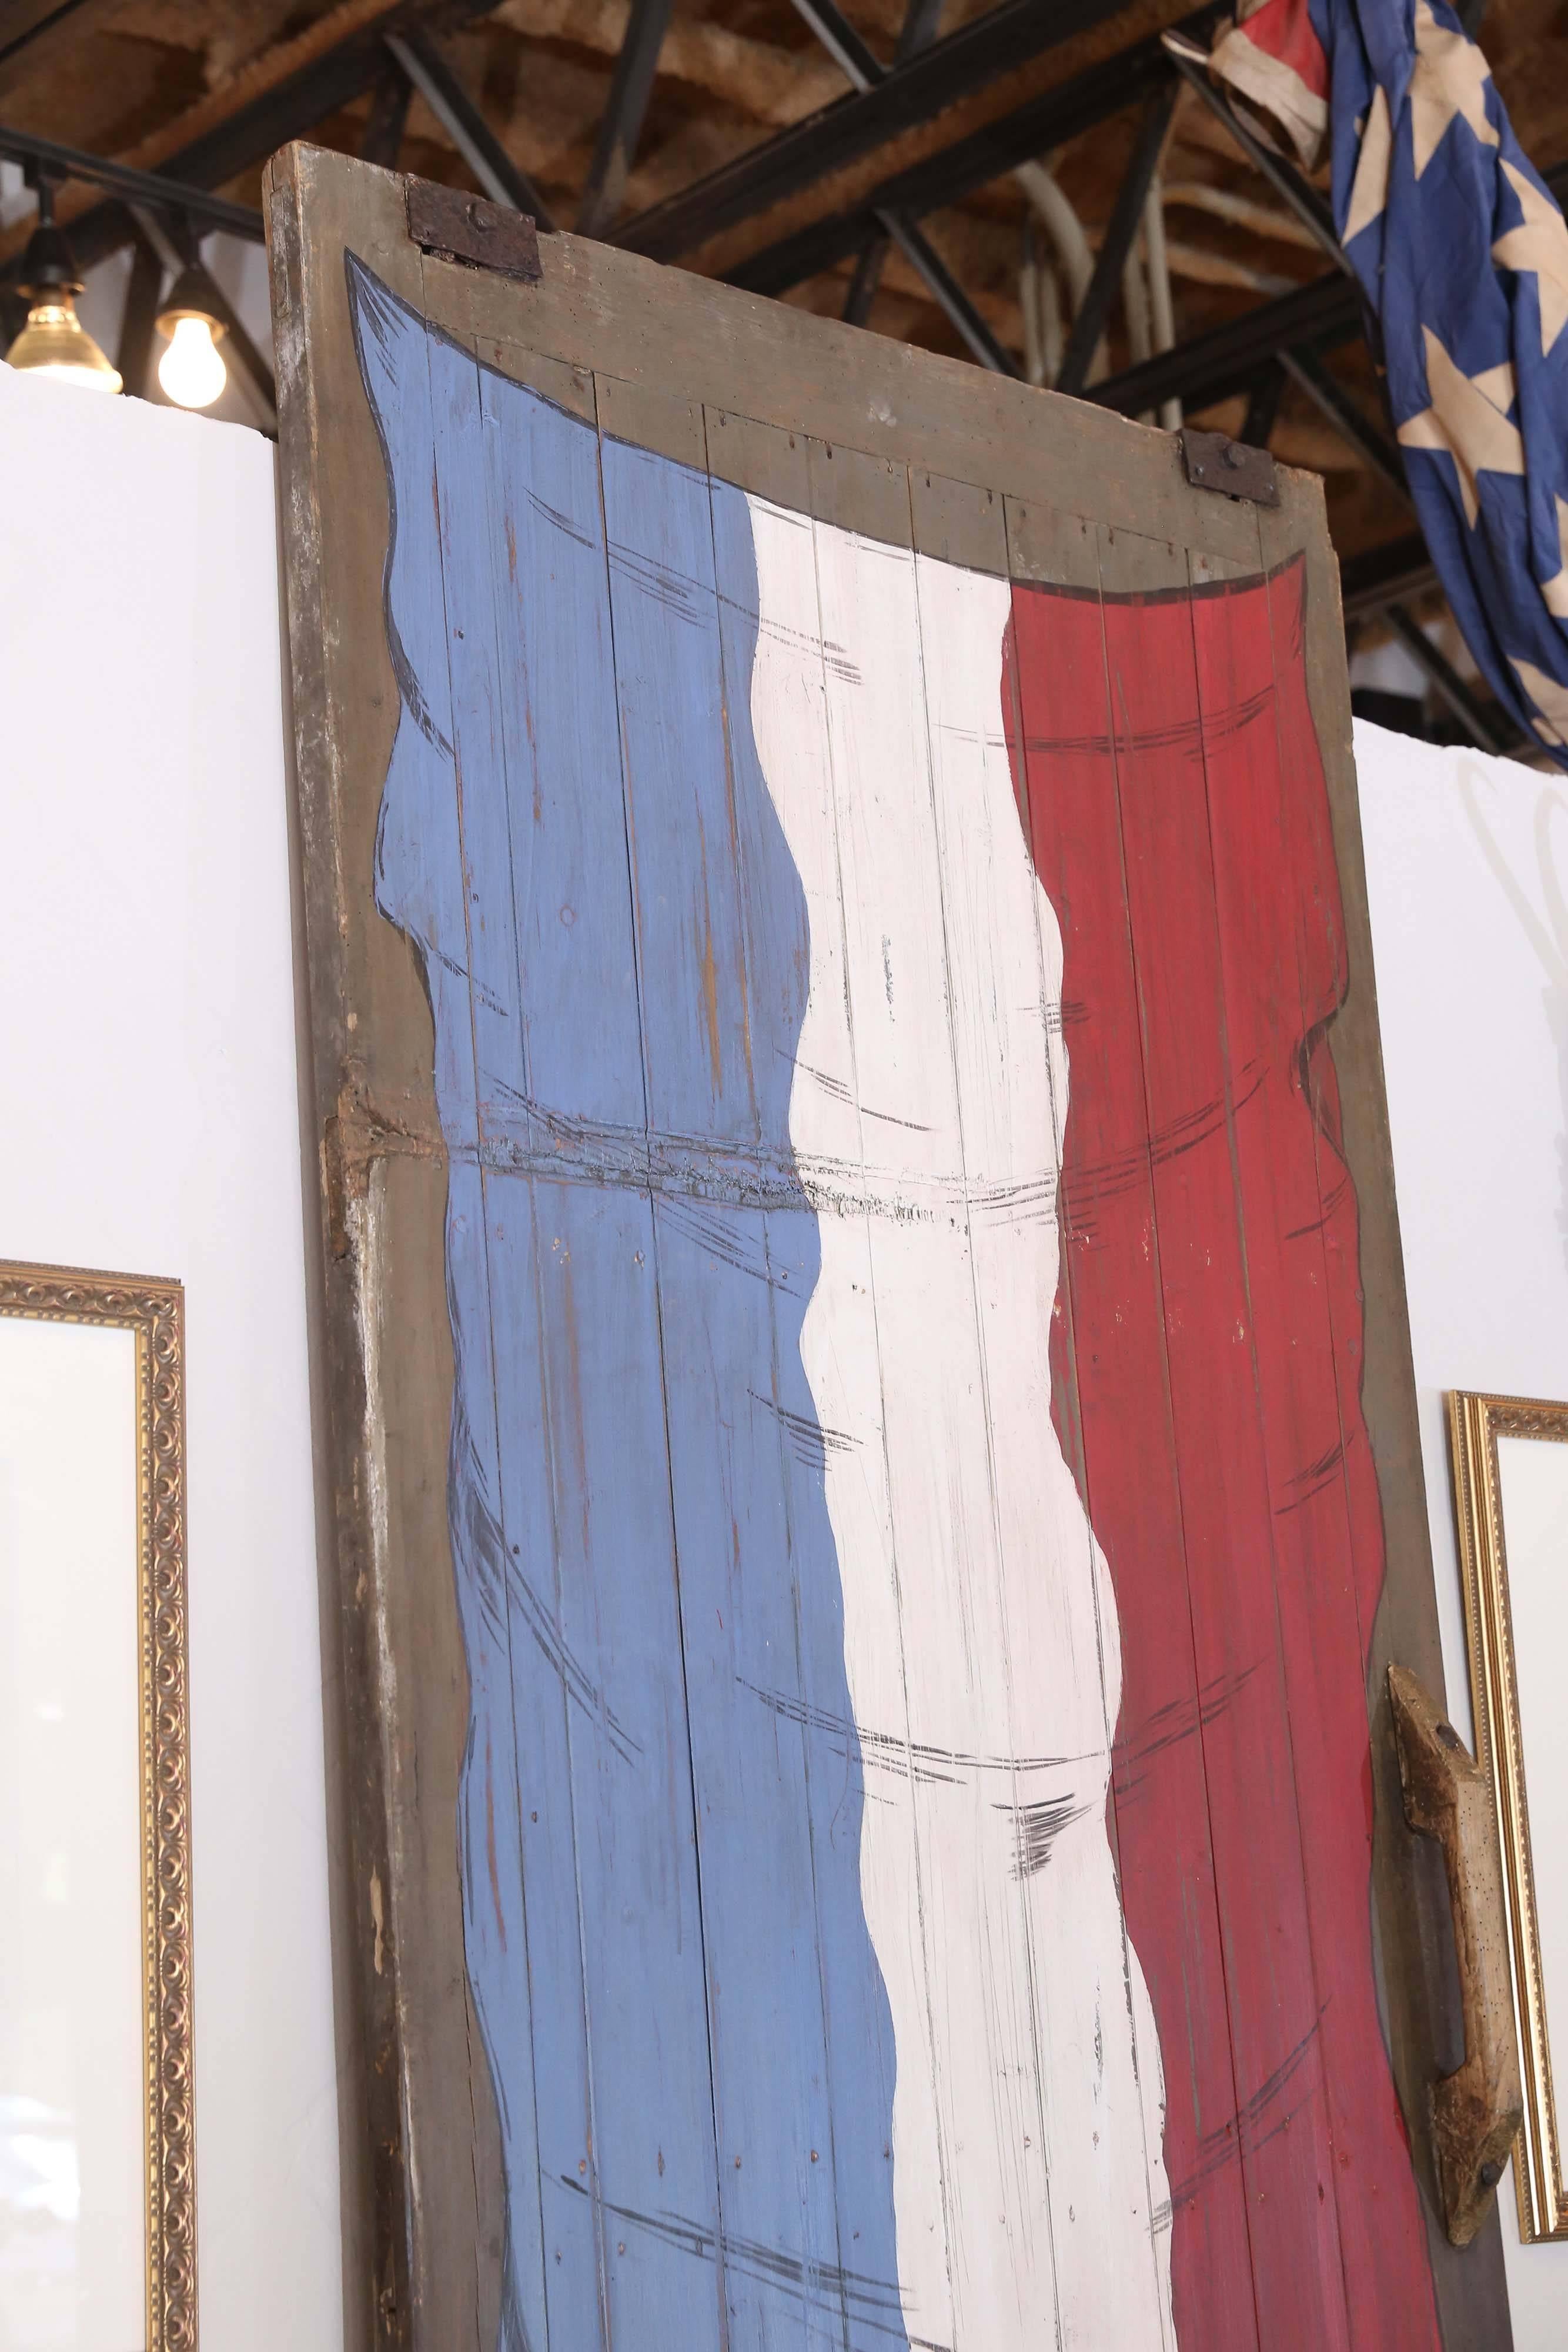 Wood Large Antique French Barn Door with Flag of France Painting